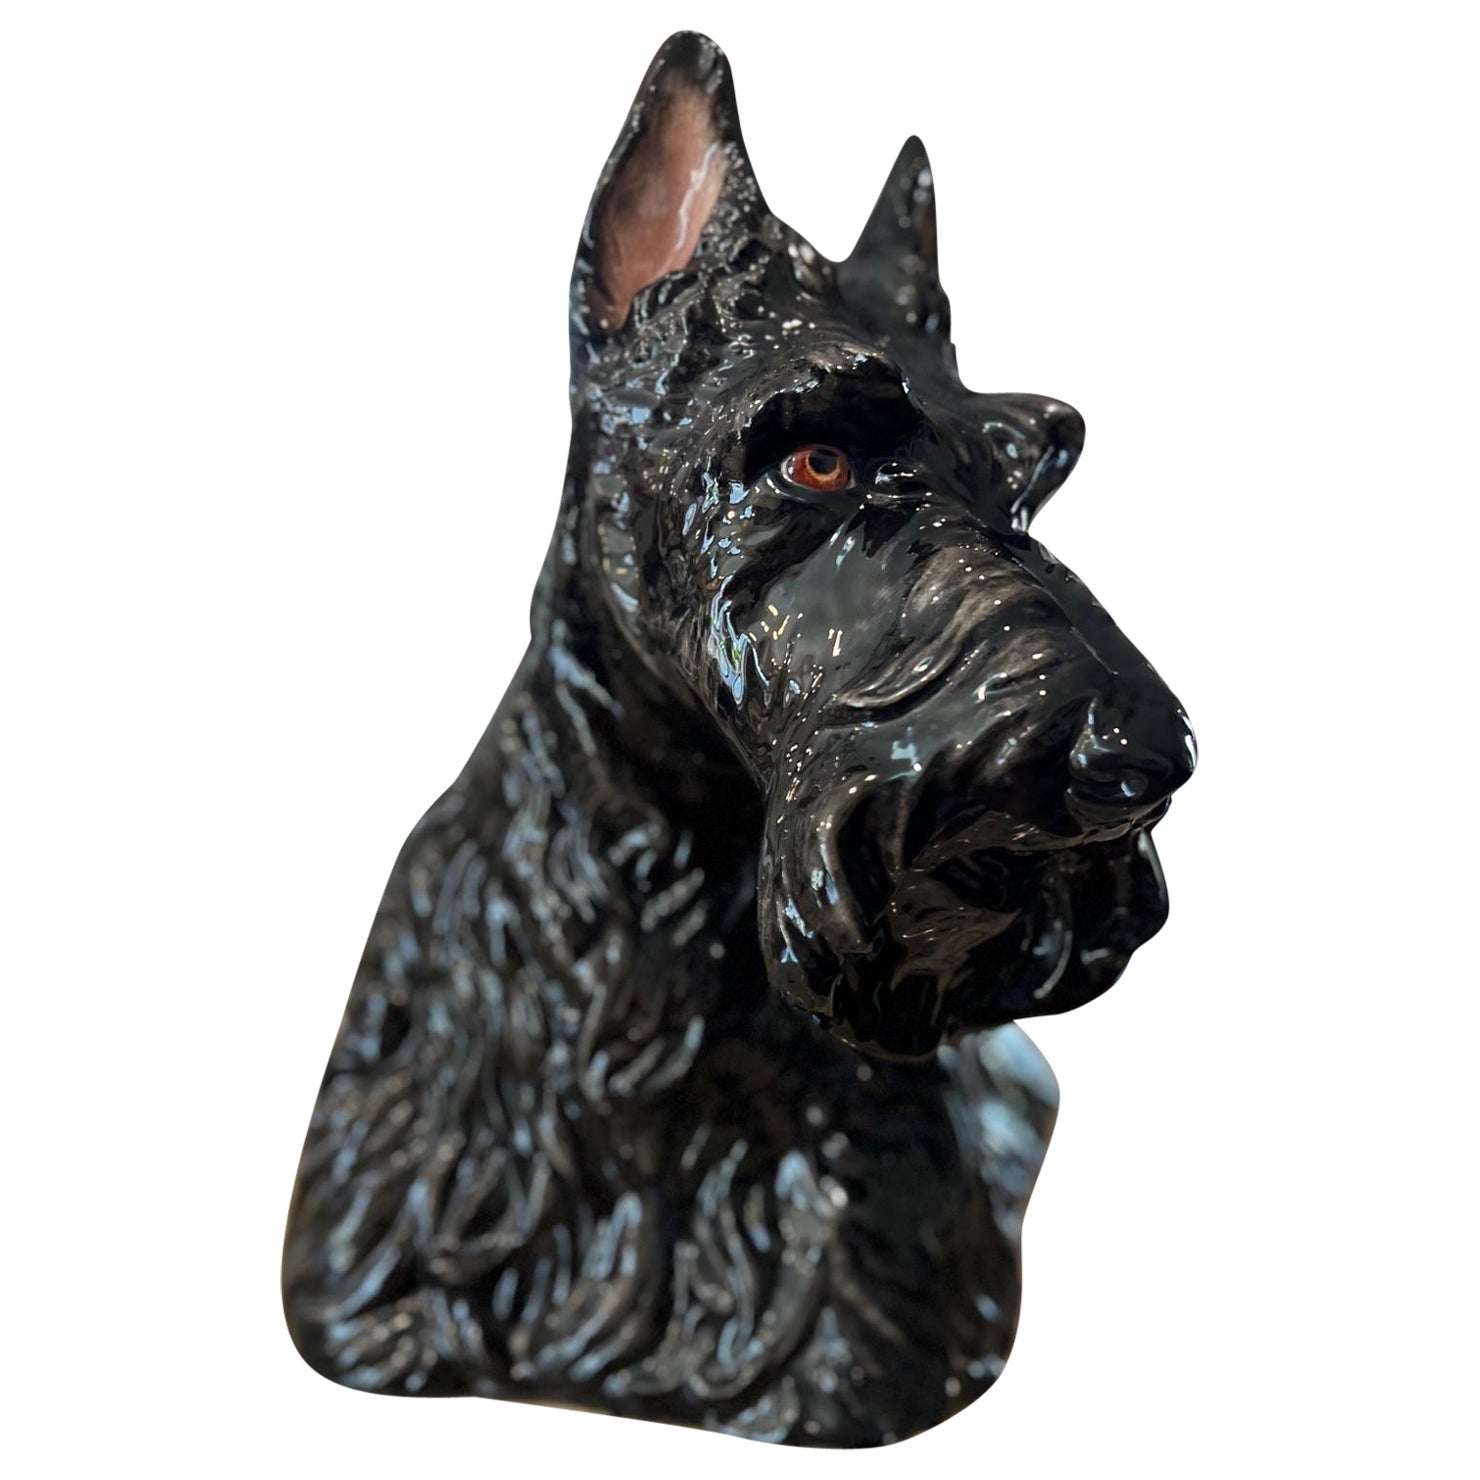 Vintage Ceramic Scottie Dog Figure - The Townsend Ceramic and Glass Co. Florida For Sale